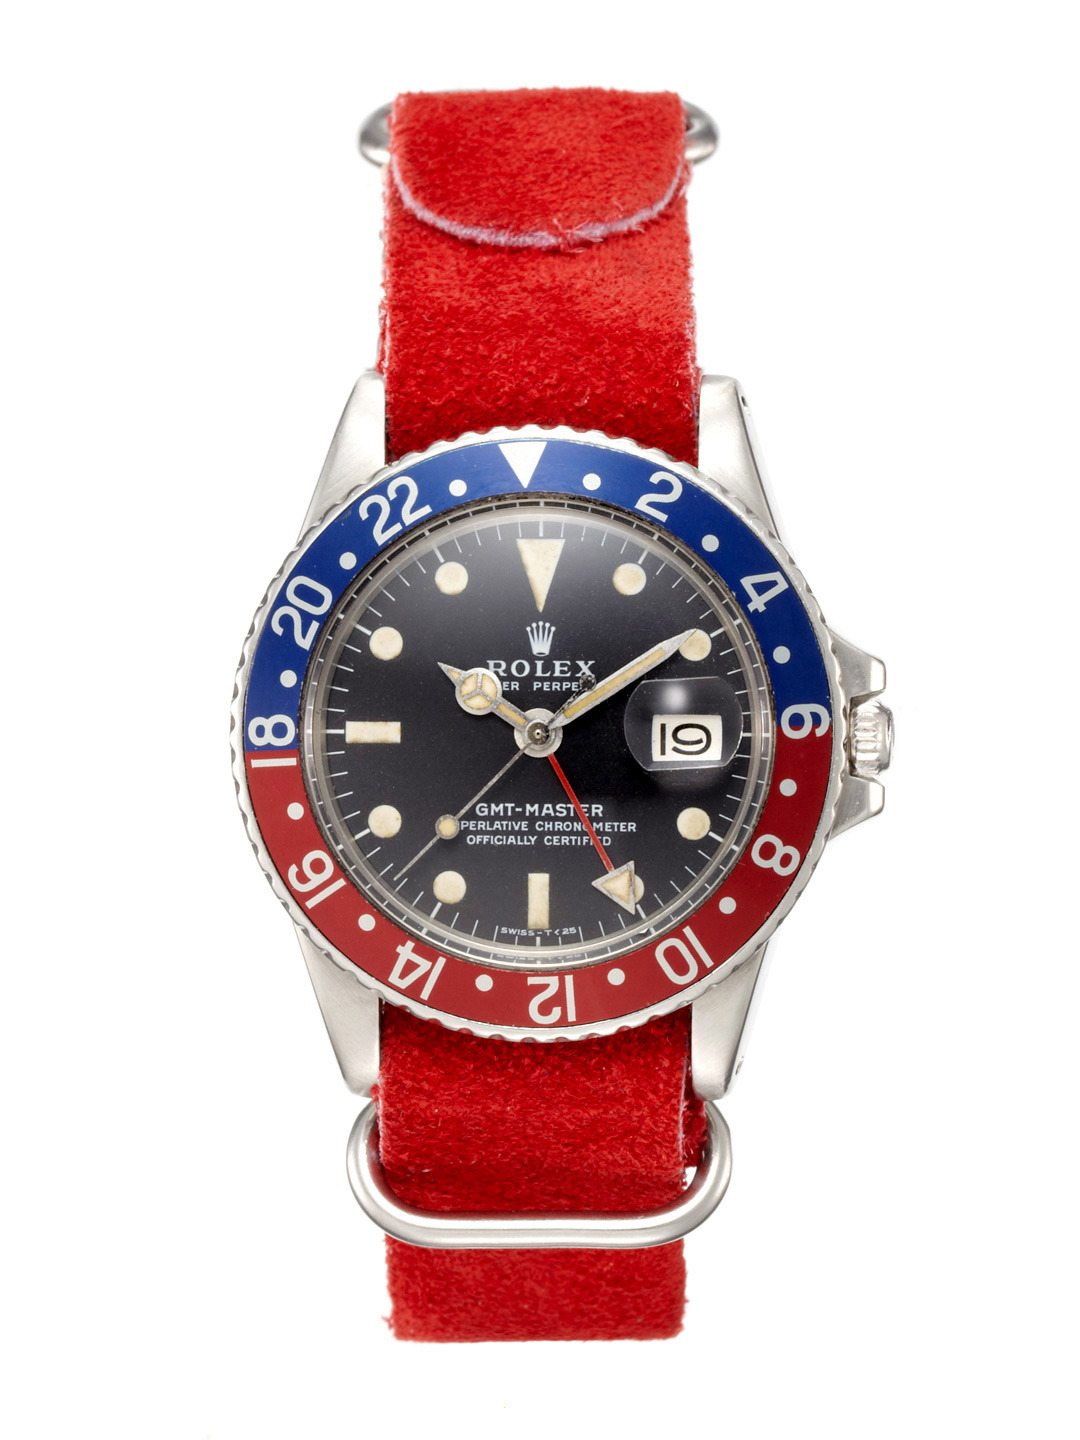 Rolex Stainless-Steel Oyster Perpetual GMT-Master Watch (c. 1972)